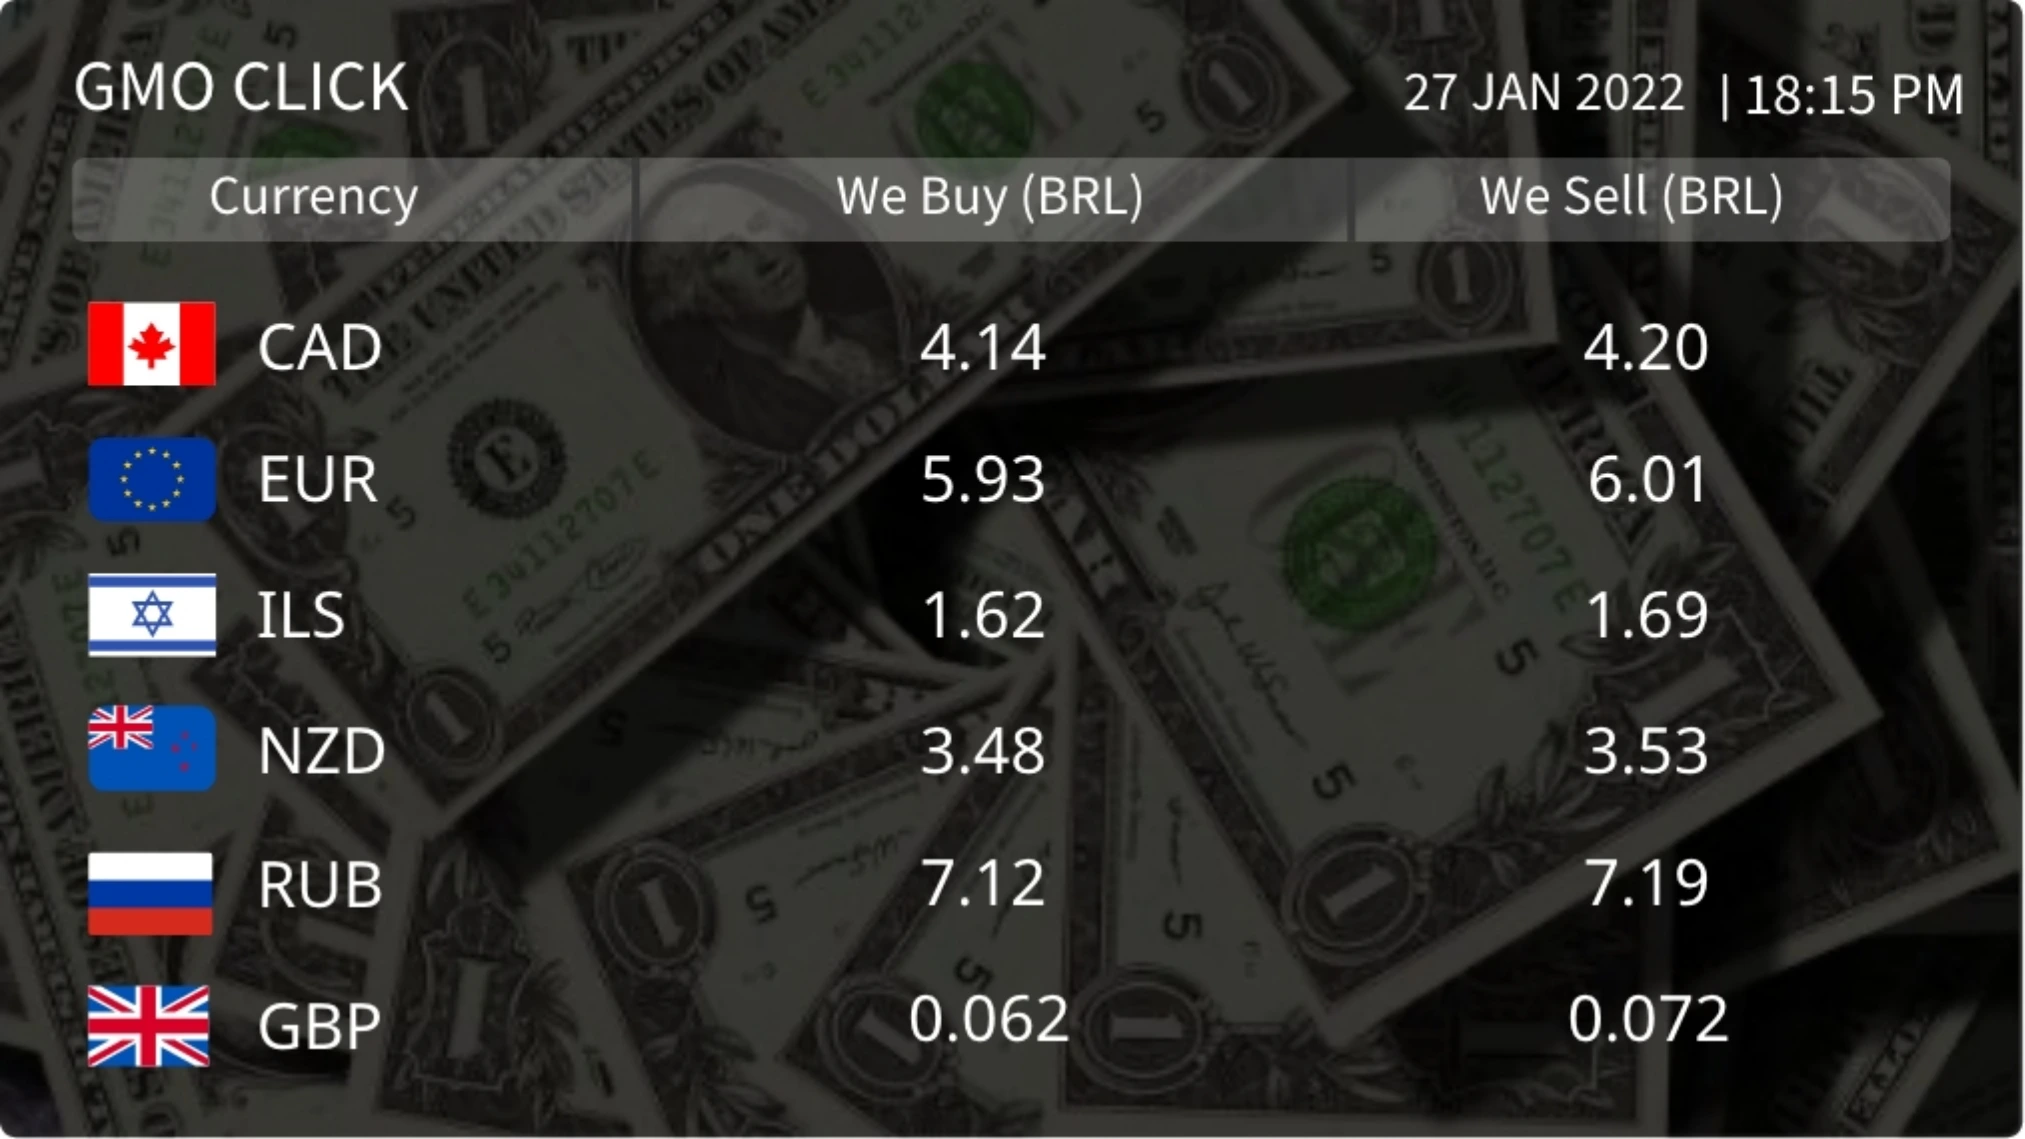 Currency app layout preview showing dollar bills image as background, GMO Click brand text and currency rates CAD, RUB, etc.